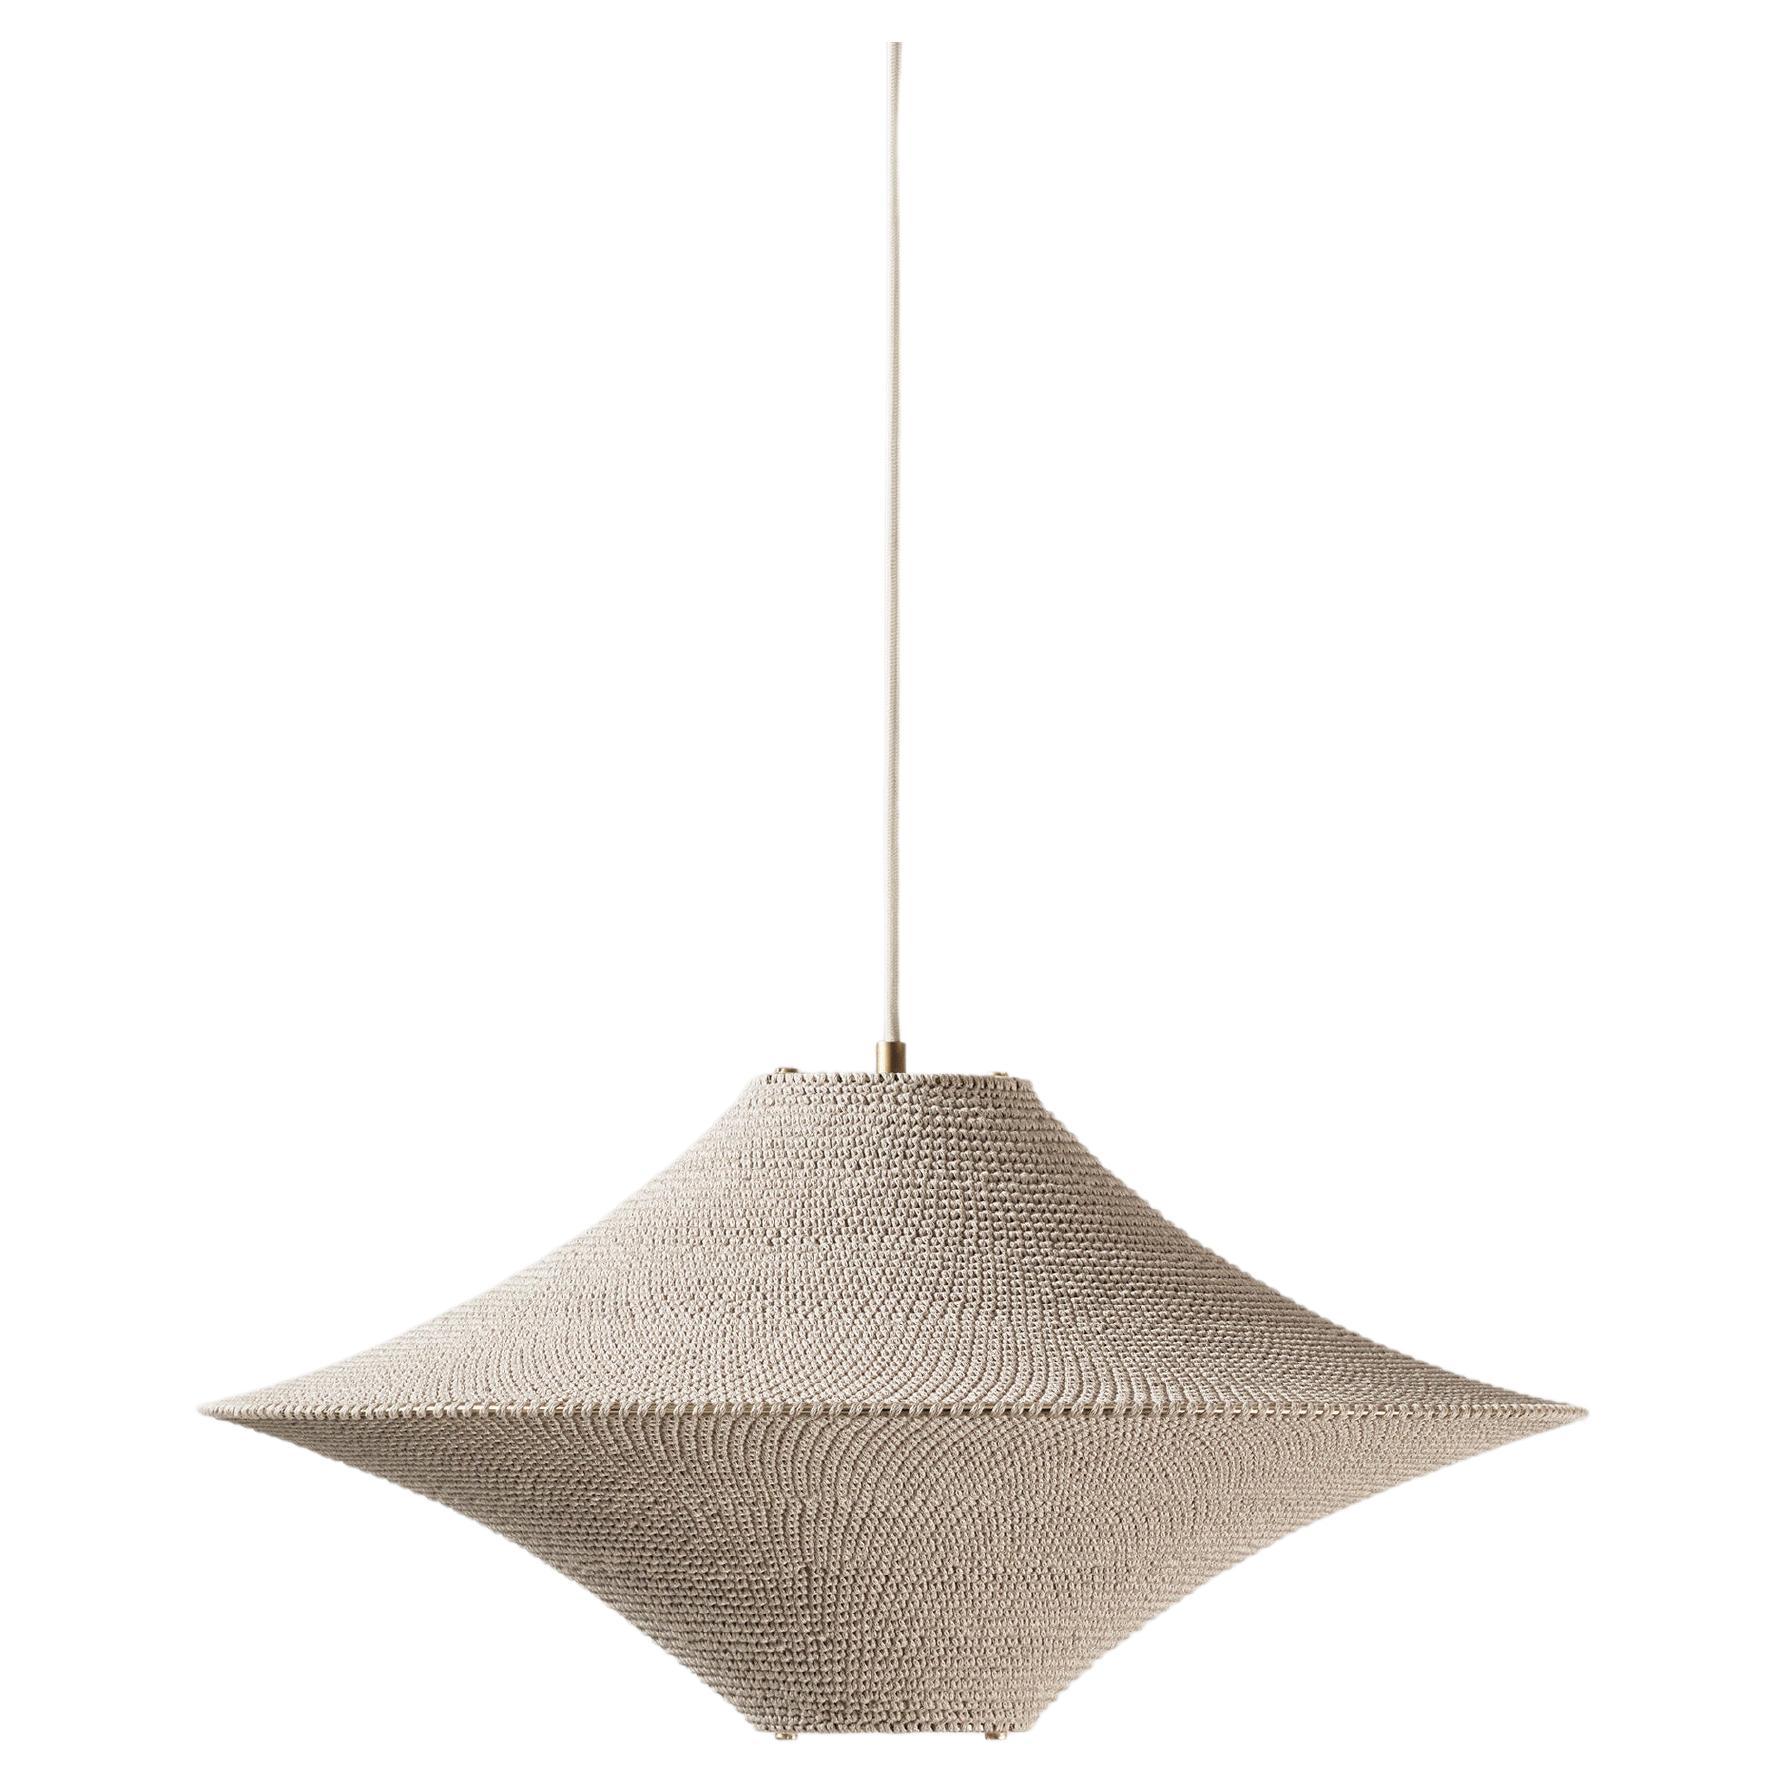 SOLITAIRE 01 Pendant Light Ø80cm/31.5in, Hand Crocheted in Egyptian Cotton For Sale